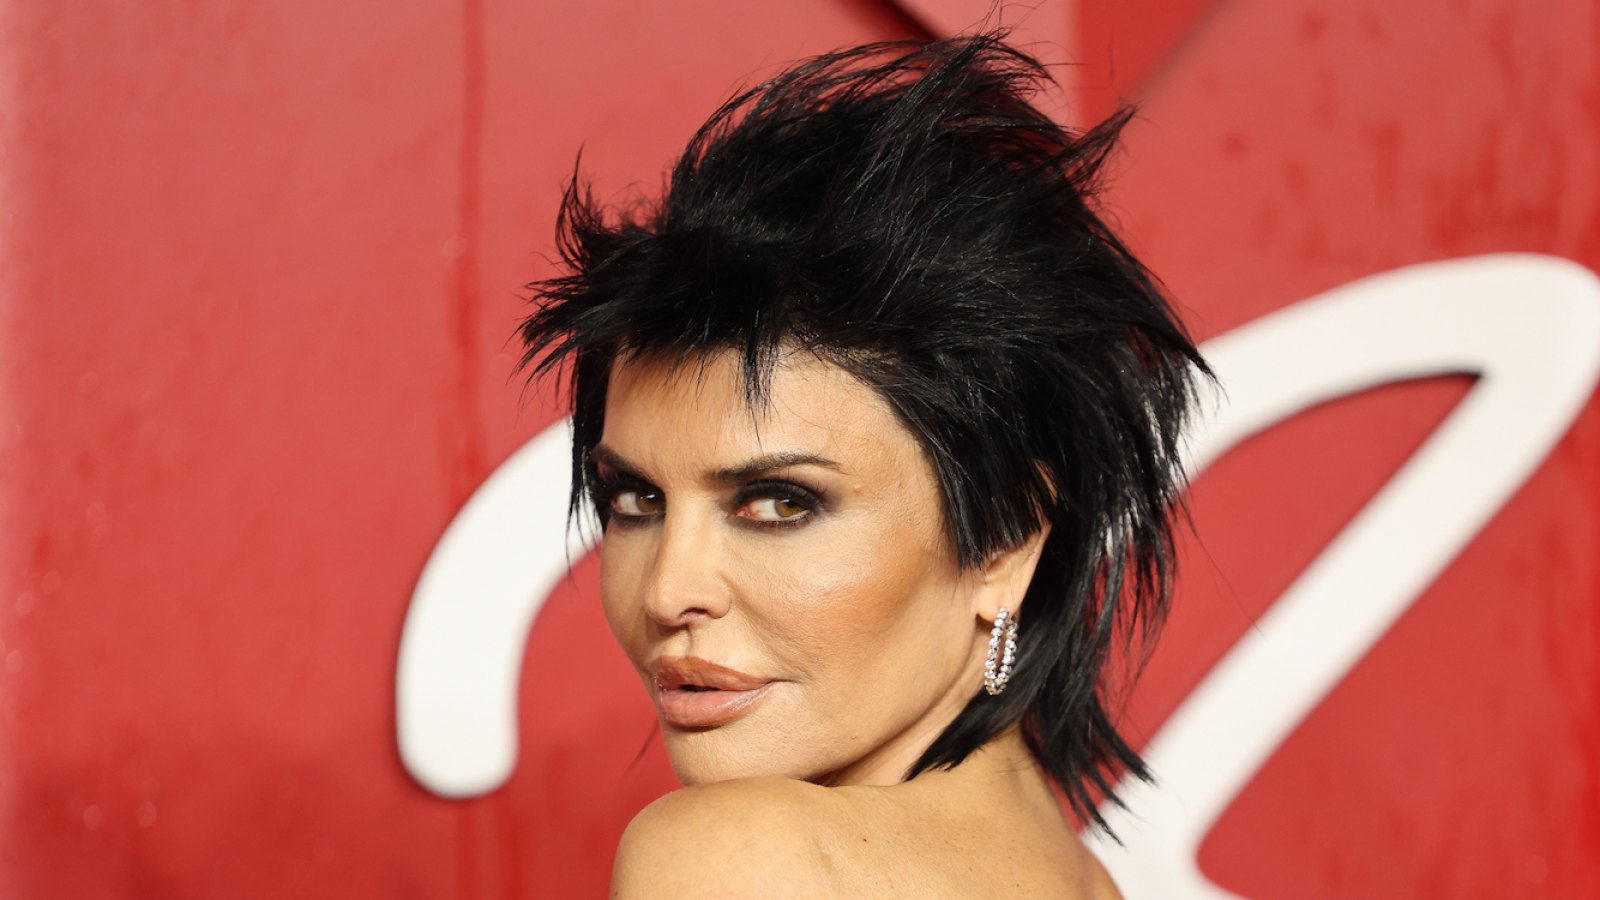 FEATURE Lisa Rinna Serves Grunge Glamour in Black Spiky Dress at the 2023 British Fashion Awards